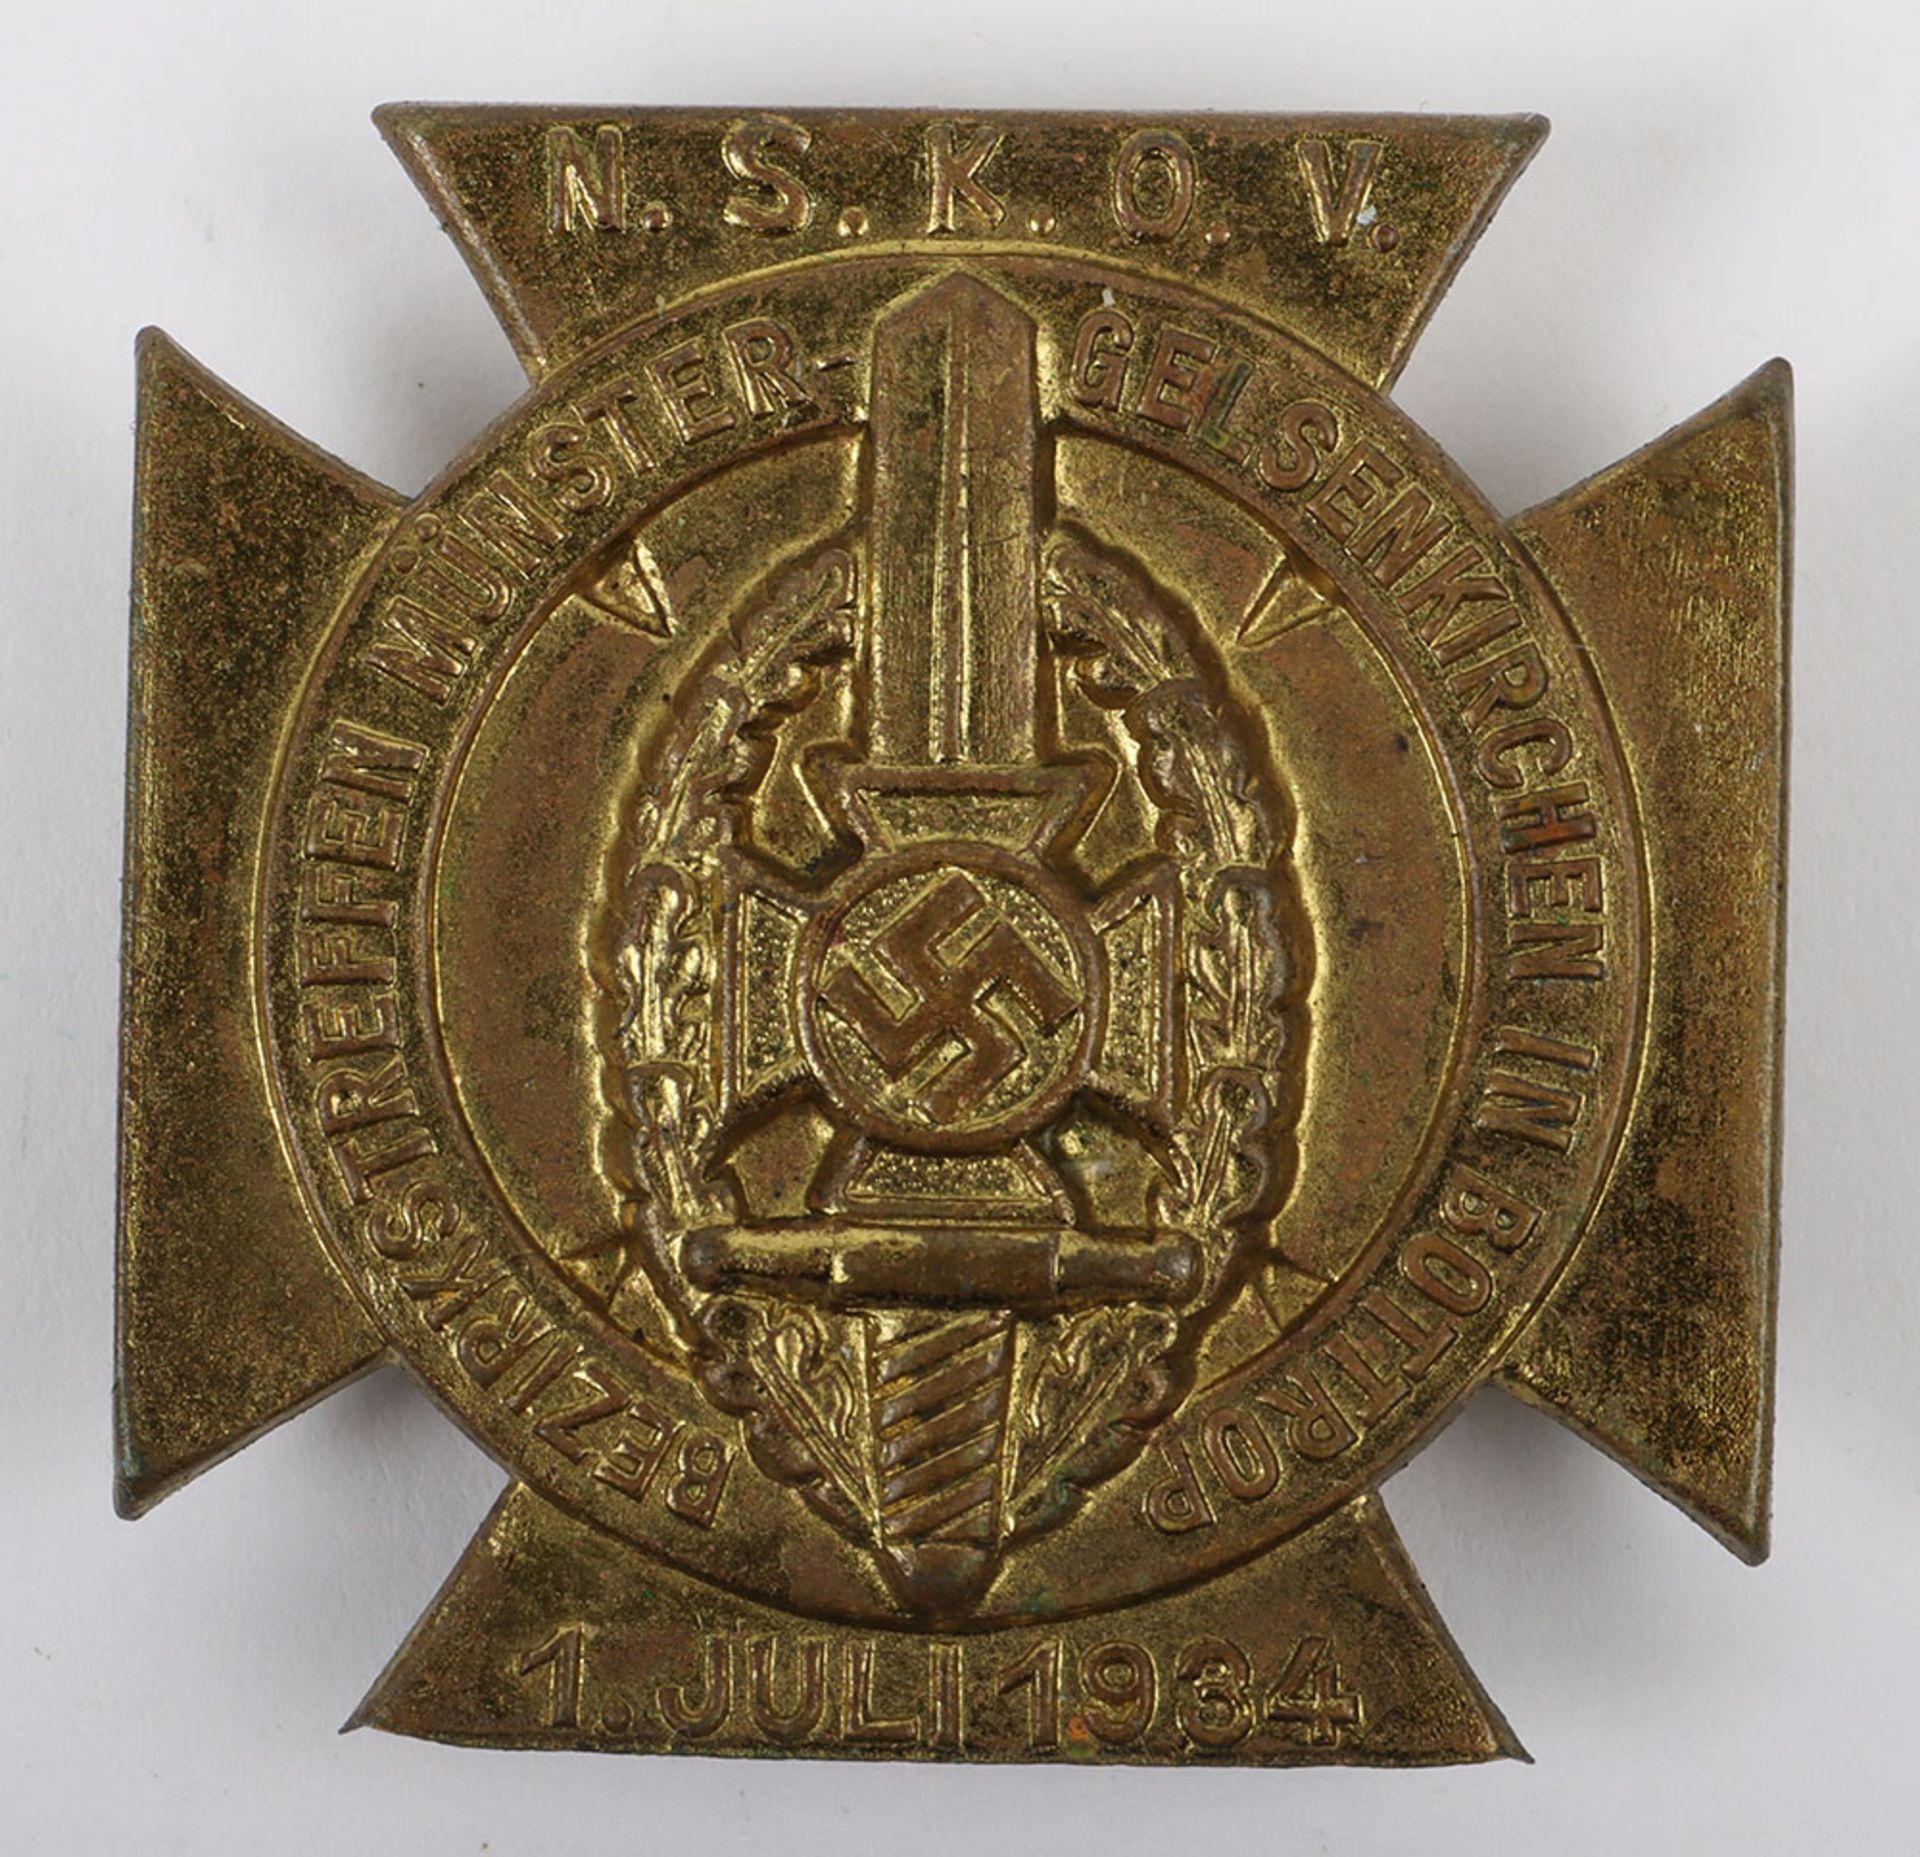 Third Reich N.S.K.O.V 1934 Day Badge - Image 2 of 3